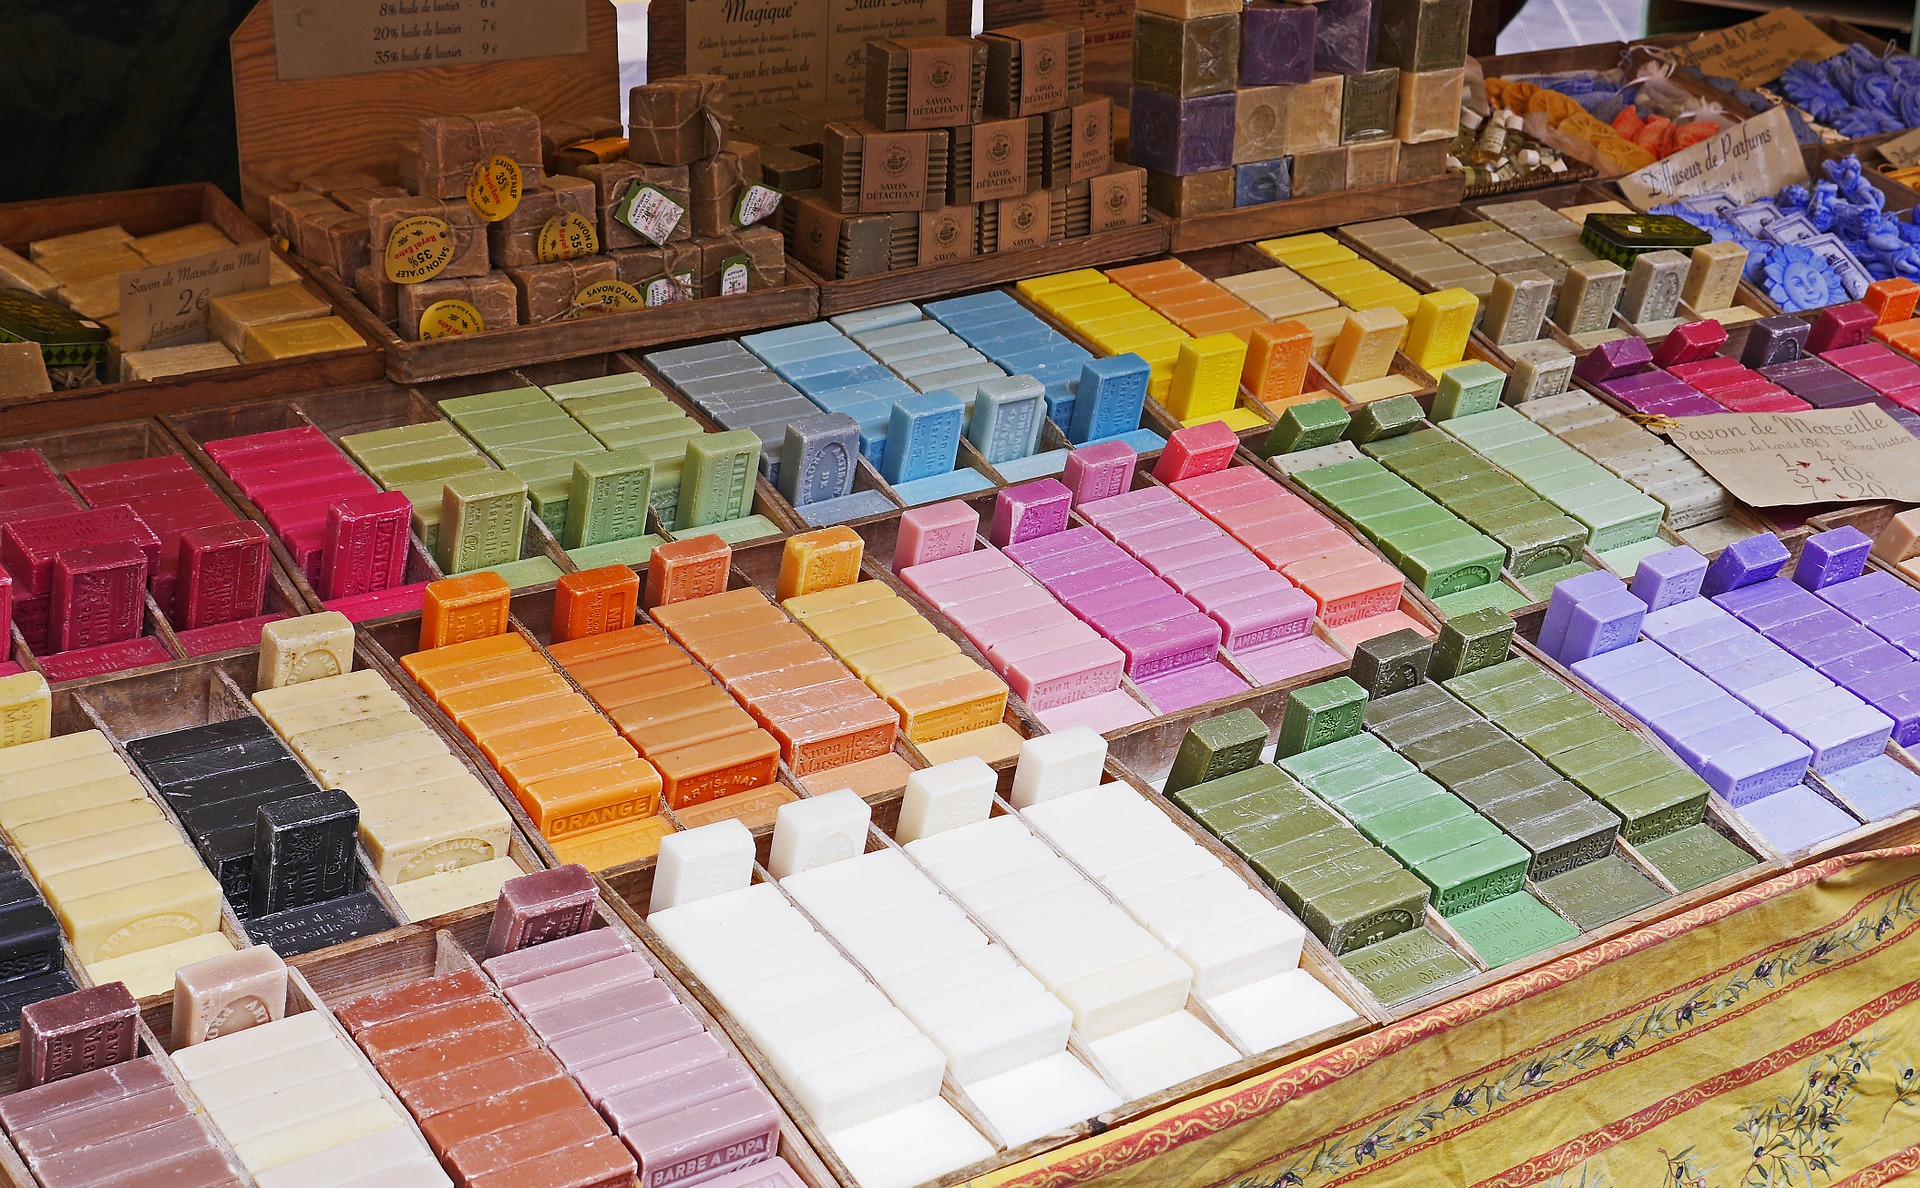 anti-packaging emerges in soap - bars of soap without containers or labels